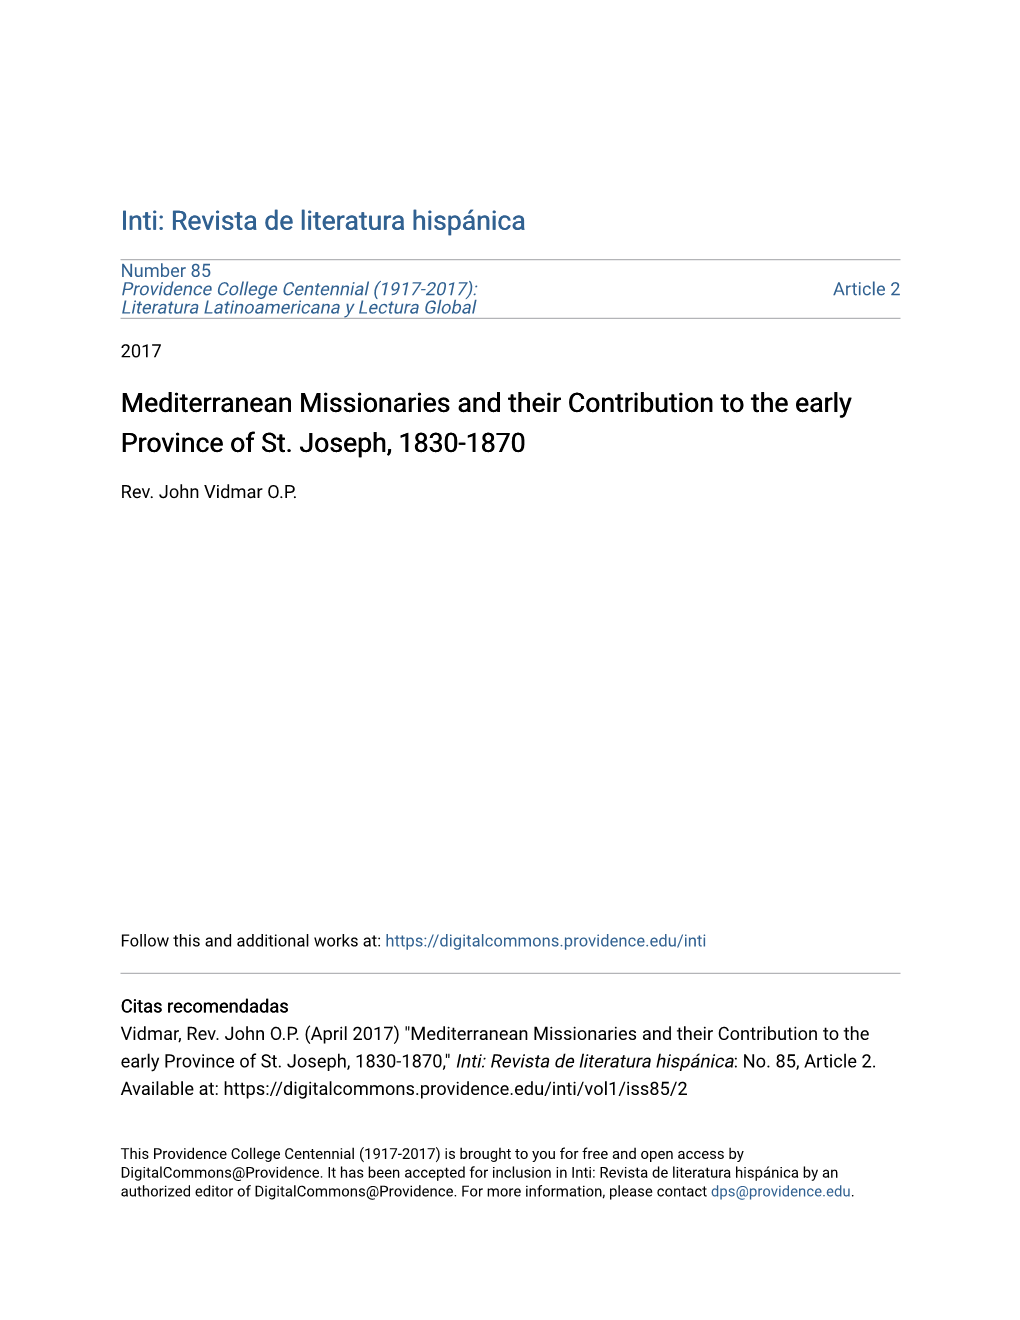 Mediterranean Missionaries and Their Contribution to the Early Province of St